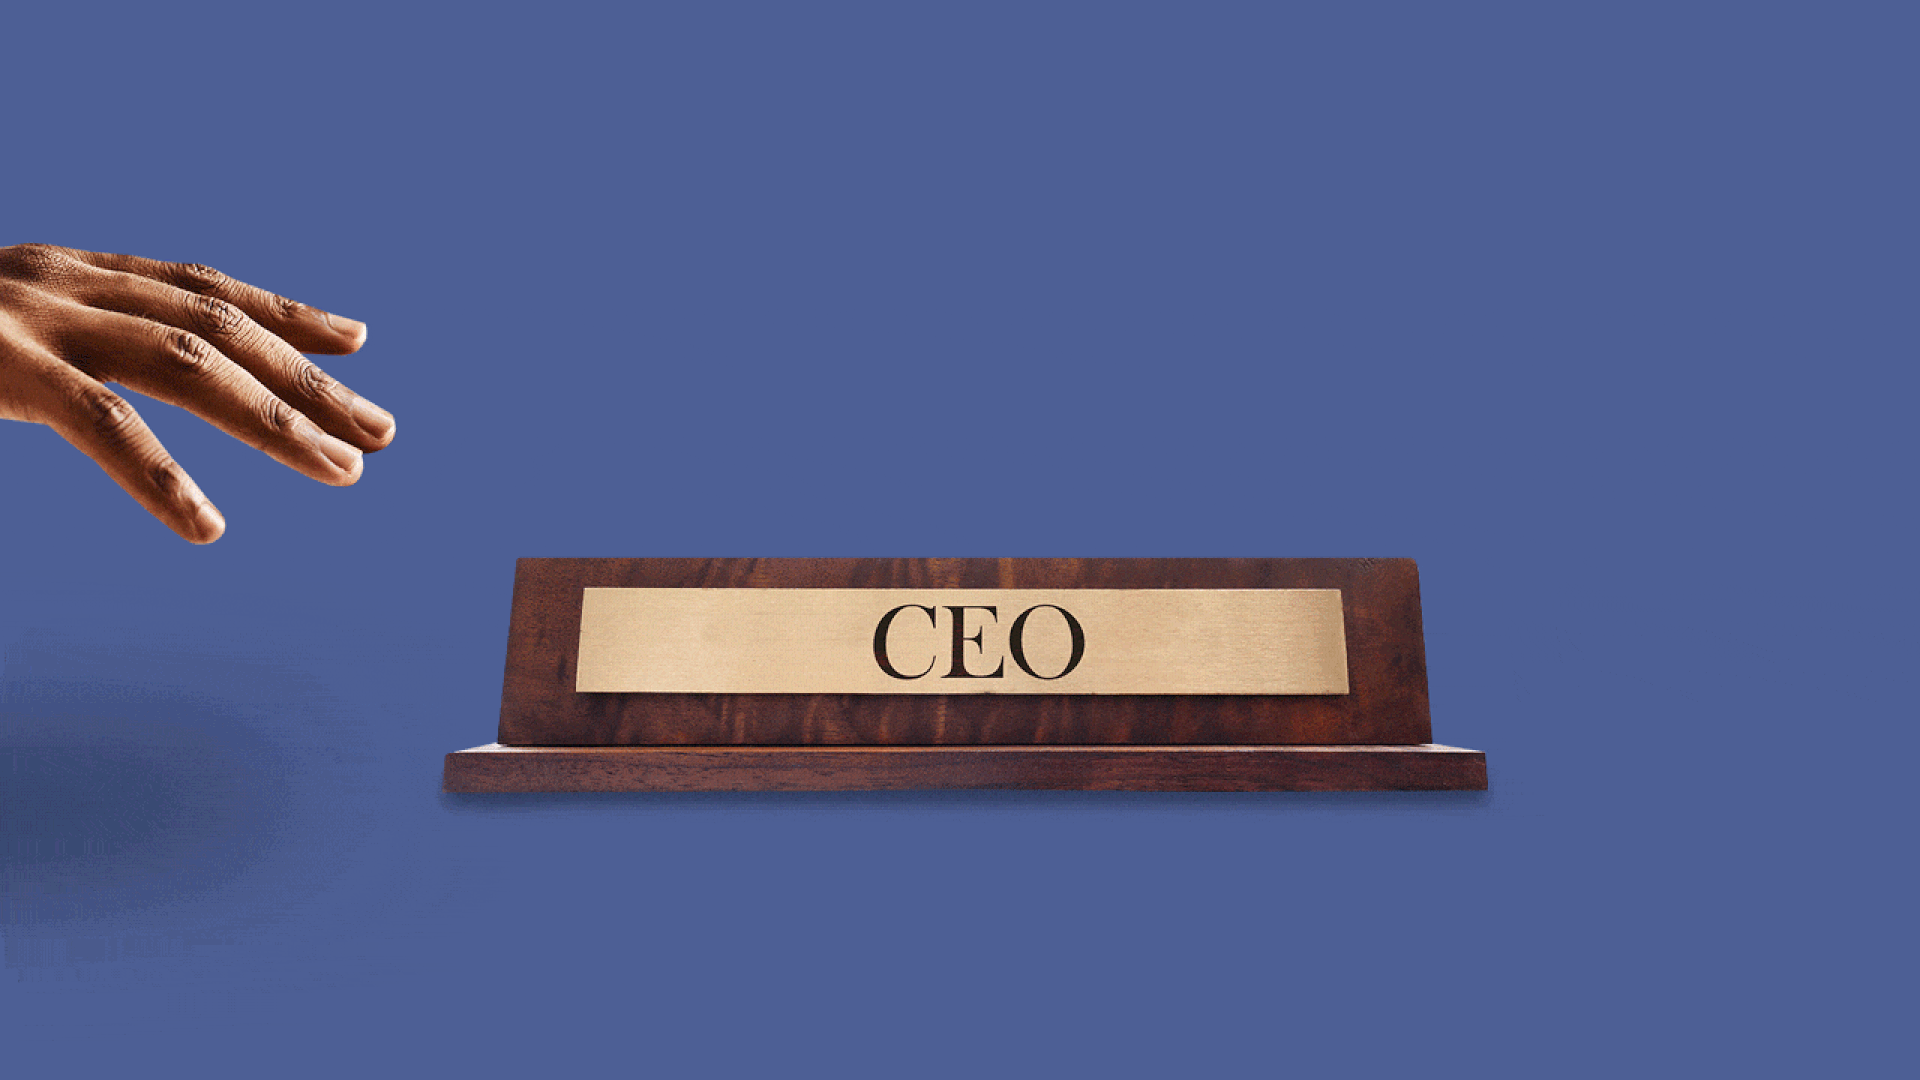 Animated illustration of a hand reaching for a CEO nameplate, which then slips away